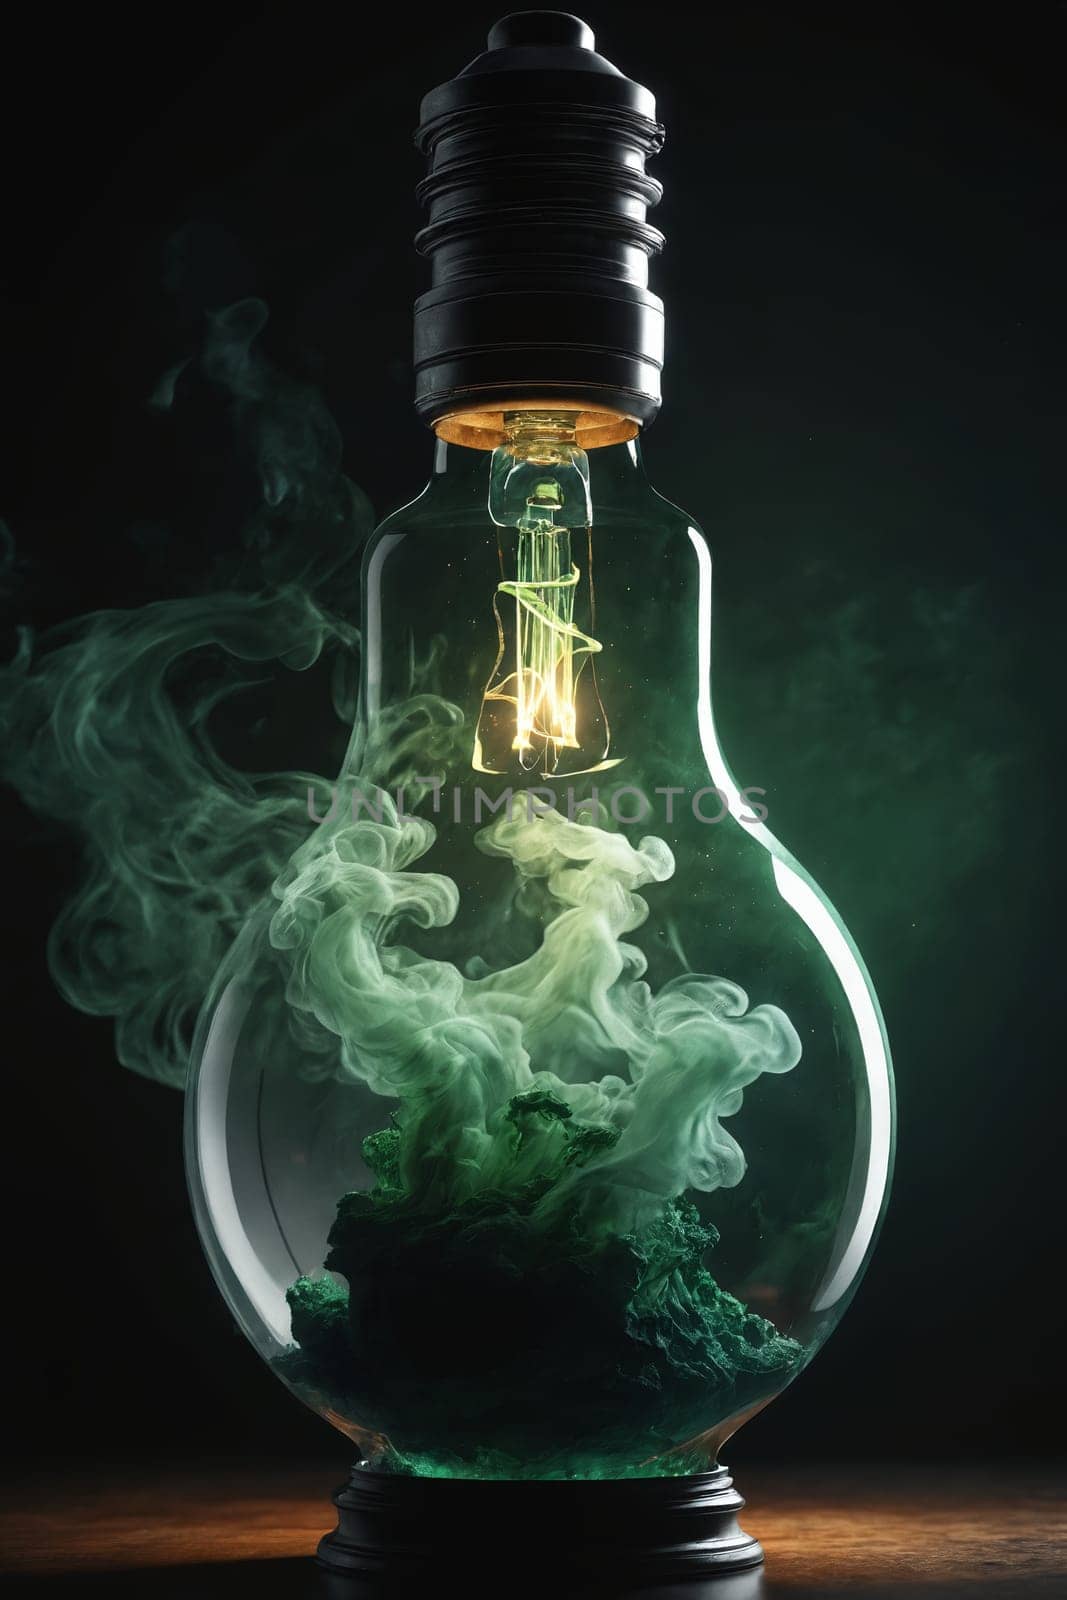 Experience the mystical aura as dense green smoke flows from an illuminated bulb, creating a scene of enchantment.